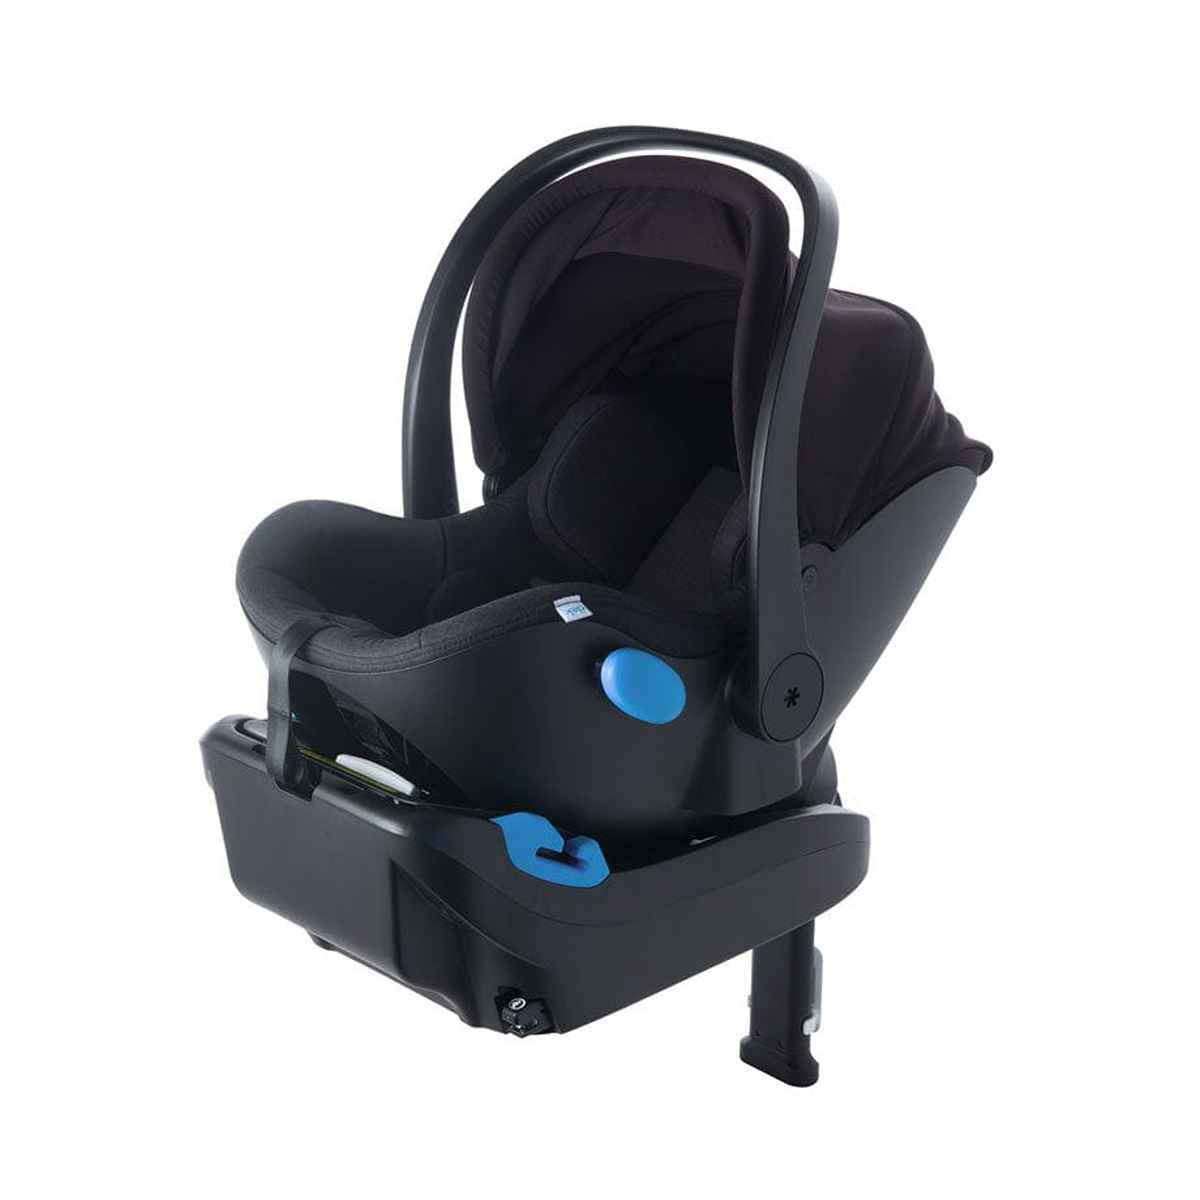 Clek Liing Infant Car Seat with Matching Insert, 826783014290 - ANB Baby